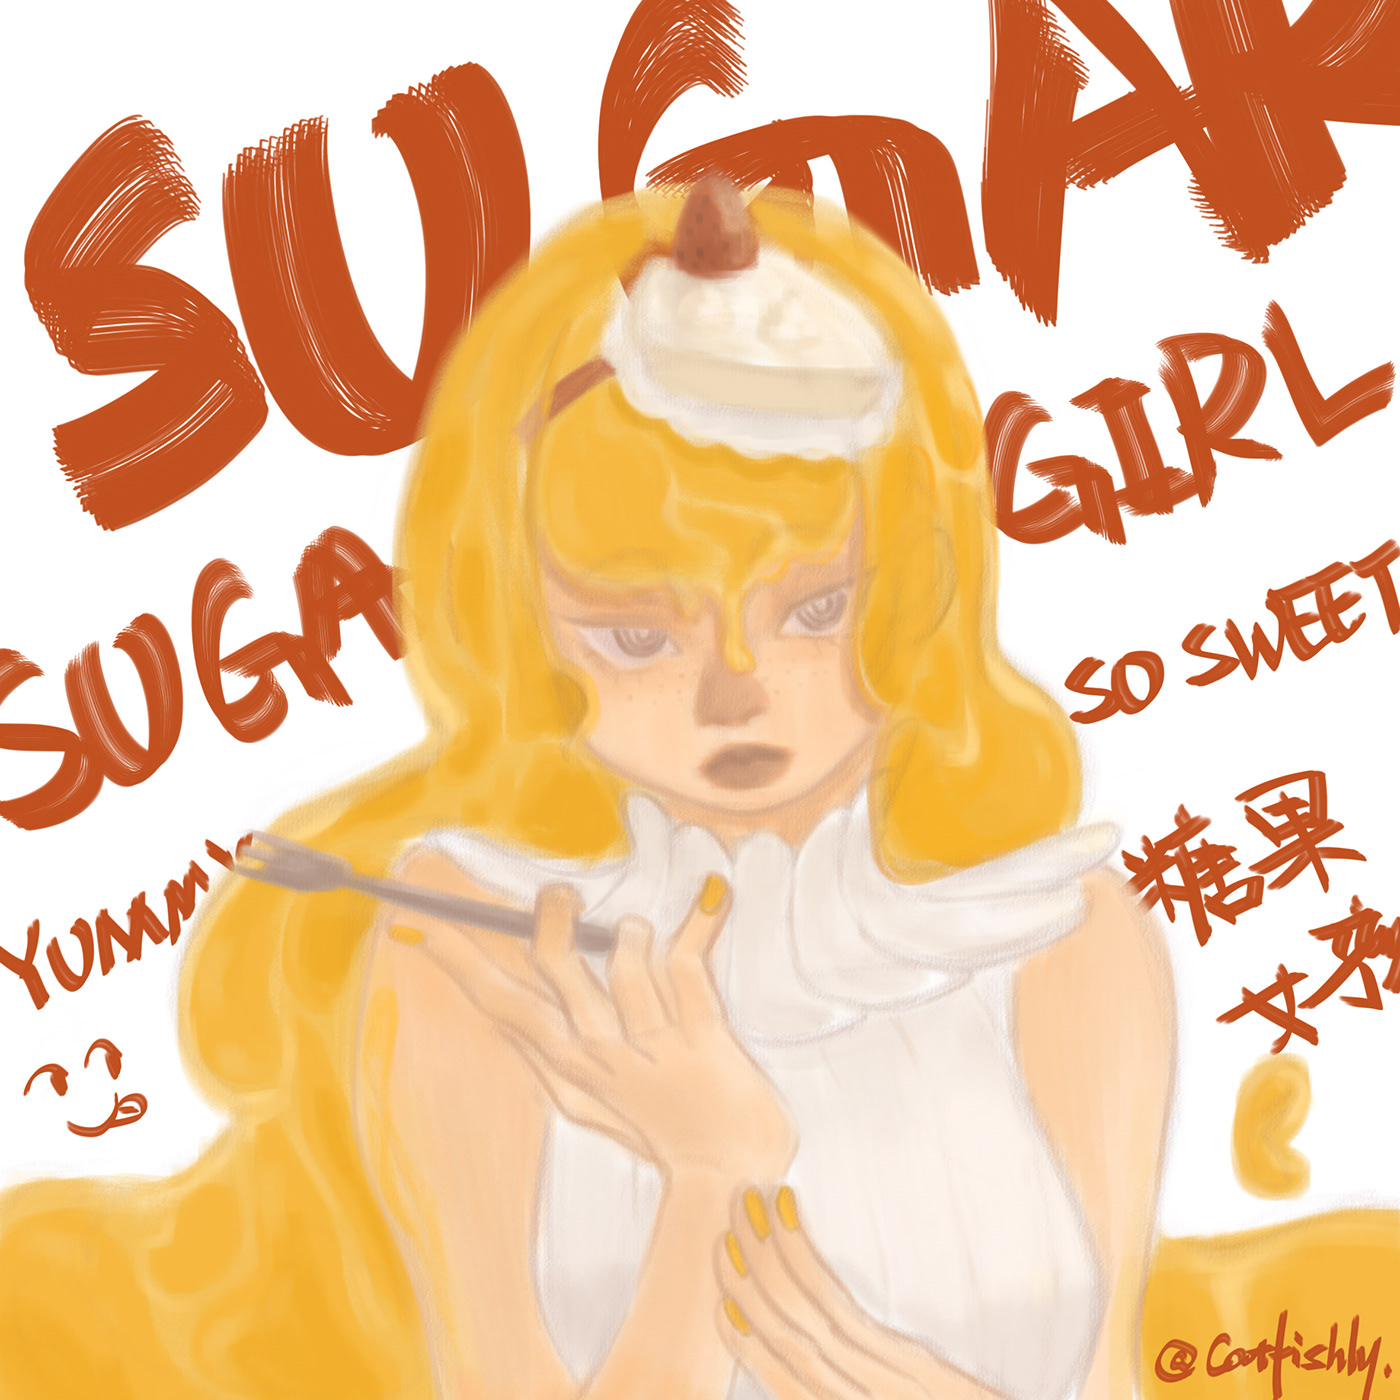 The girl made by sugar.
糖做的小女孩